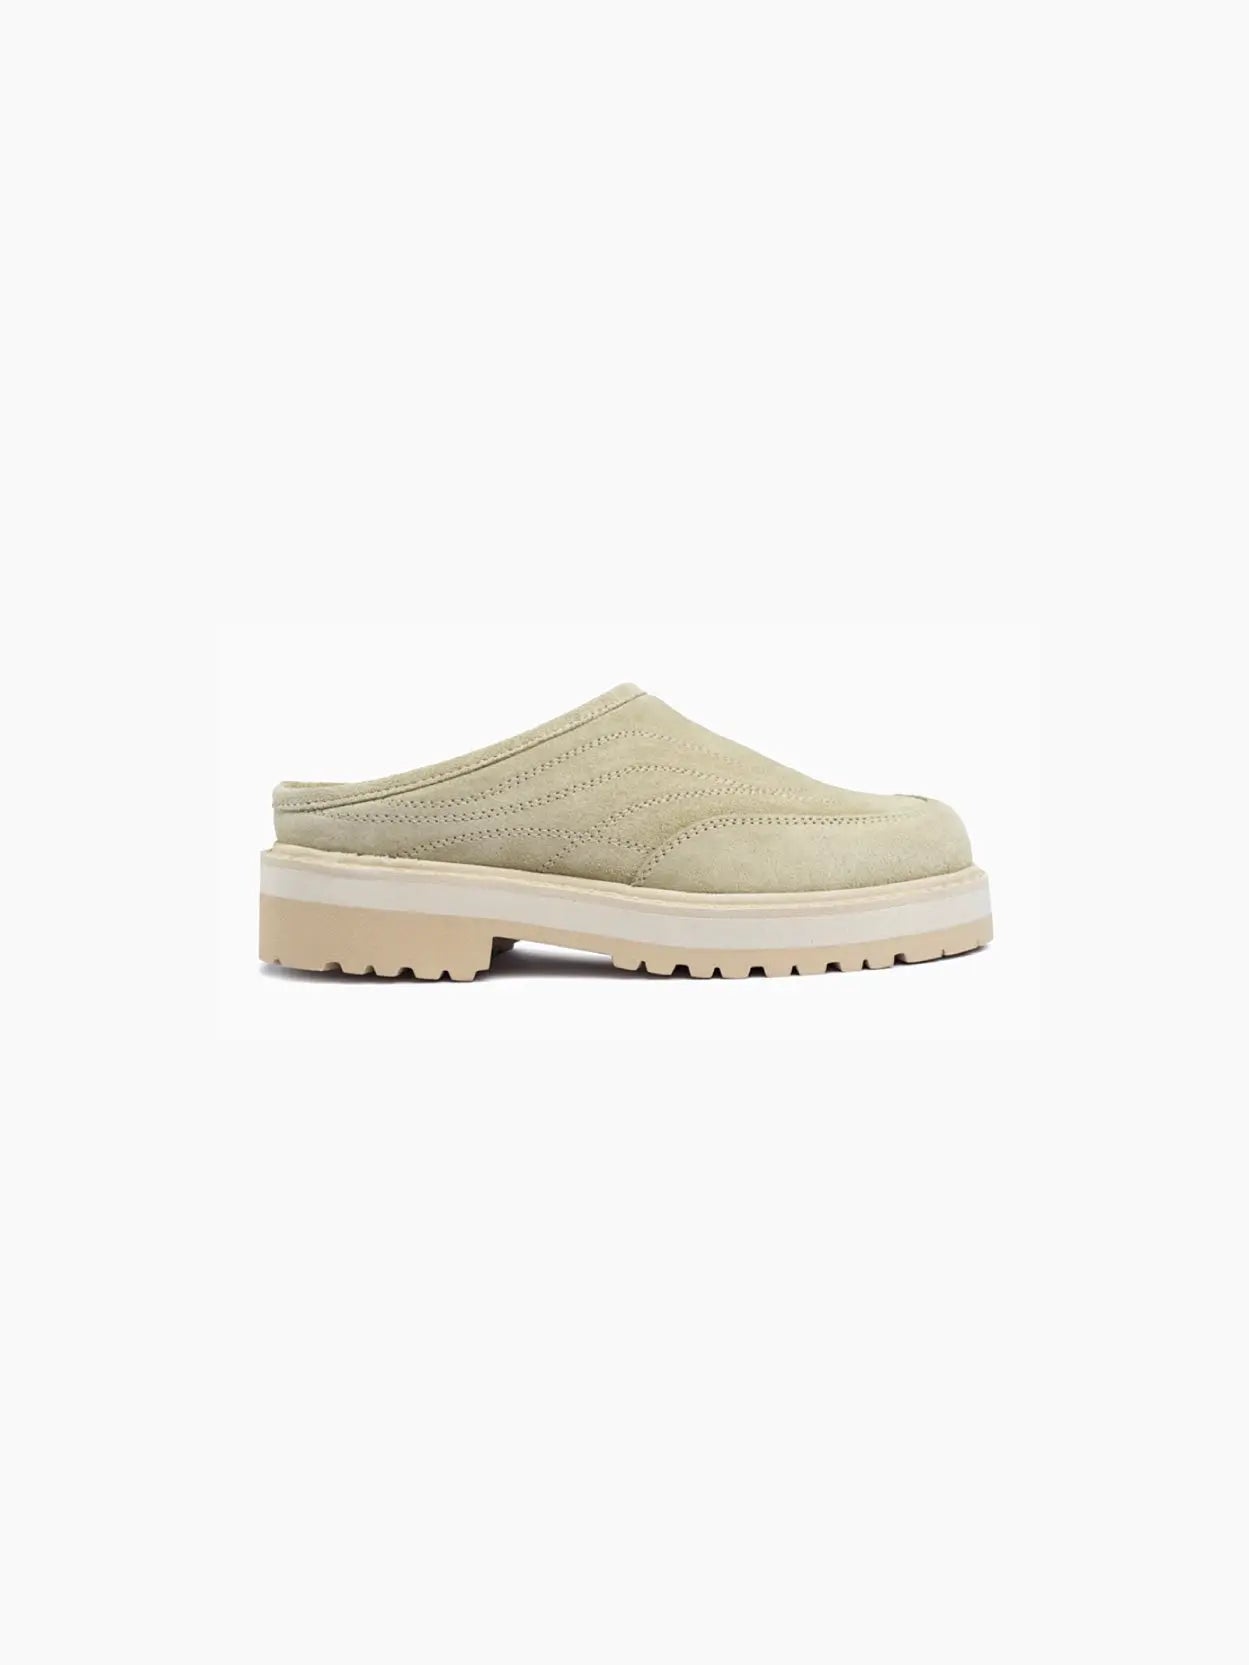 A single beige slip-on shoe, the "Maggiore Ecru Suede" by Diemme, available at bassalstore in Barcelona, featuring a rugged, lugged sole and minimalistic design. The upper part showcases subtle stitched detailing for texture. The shoe has a closed toe and an open back, resembling a mule style. The outsole is slightly thicker, offering added traction.